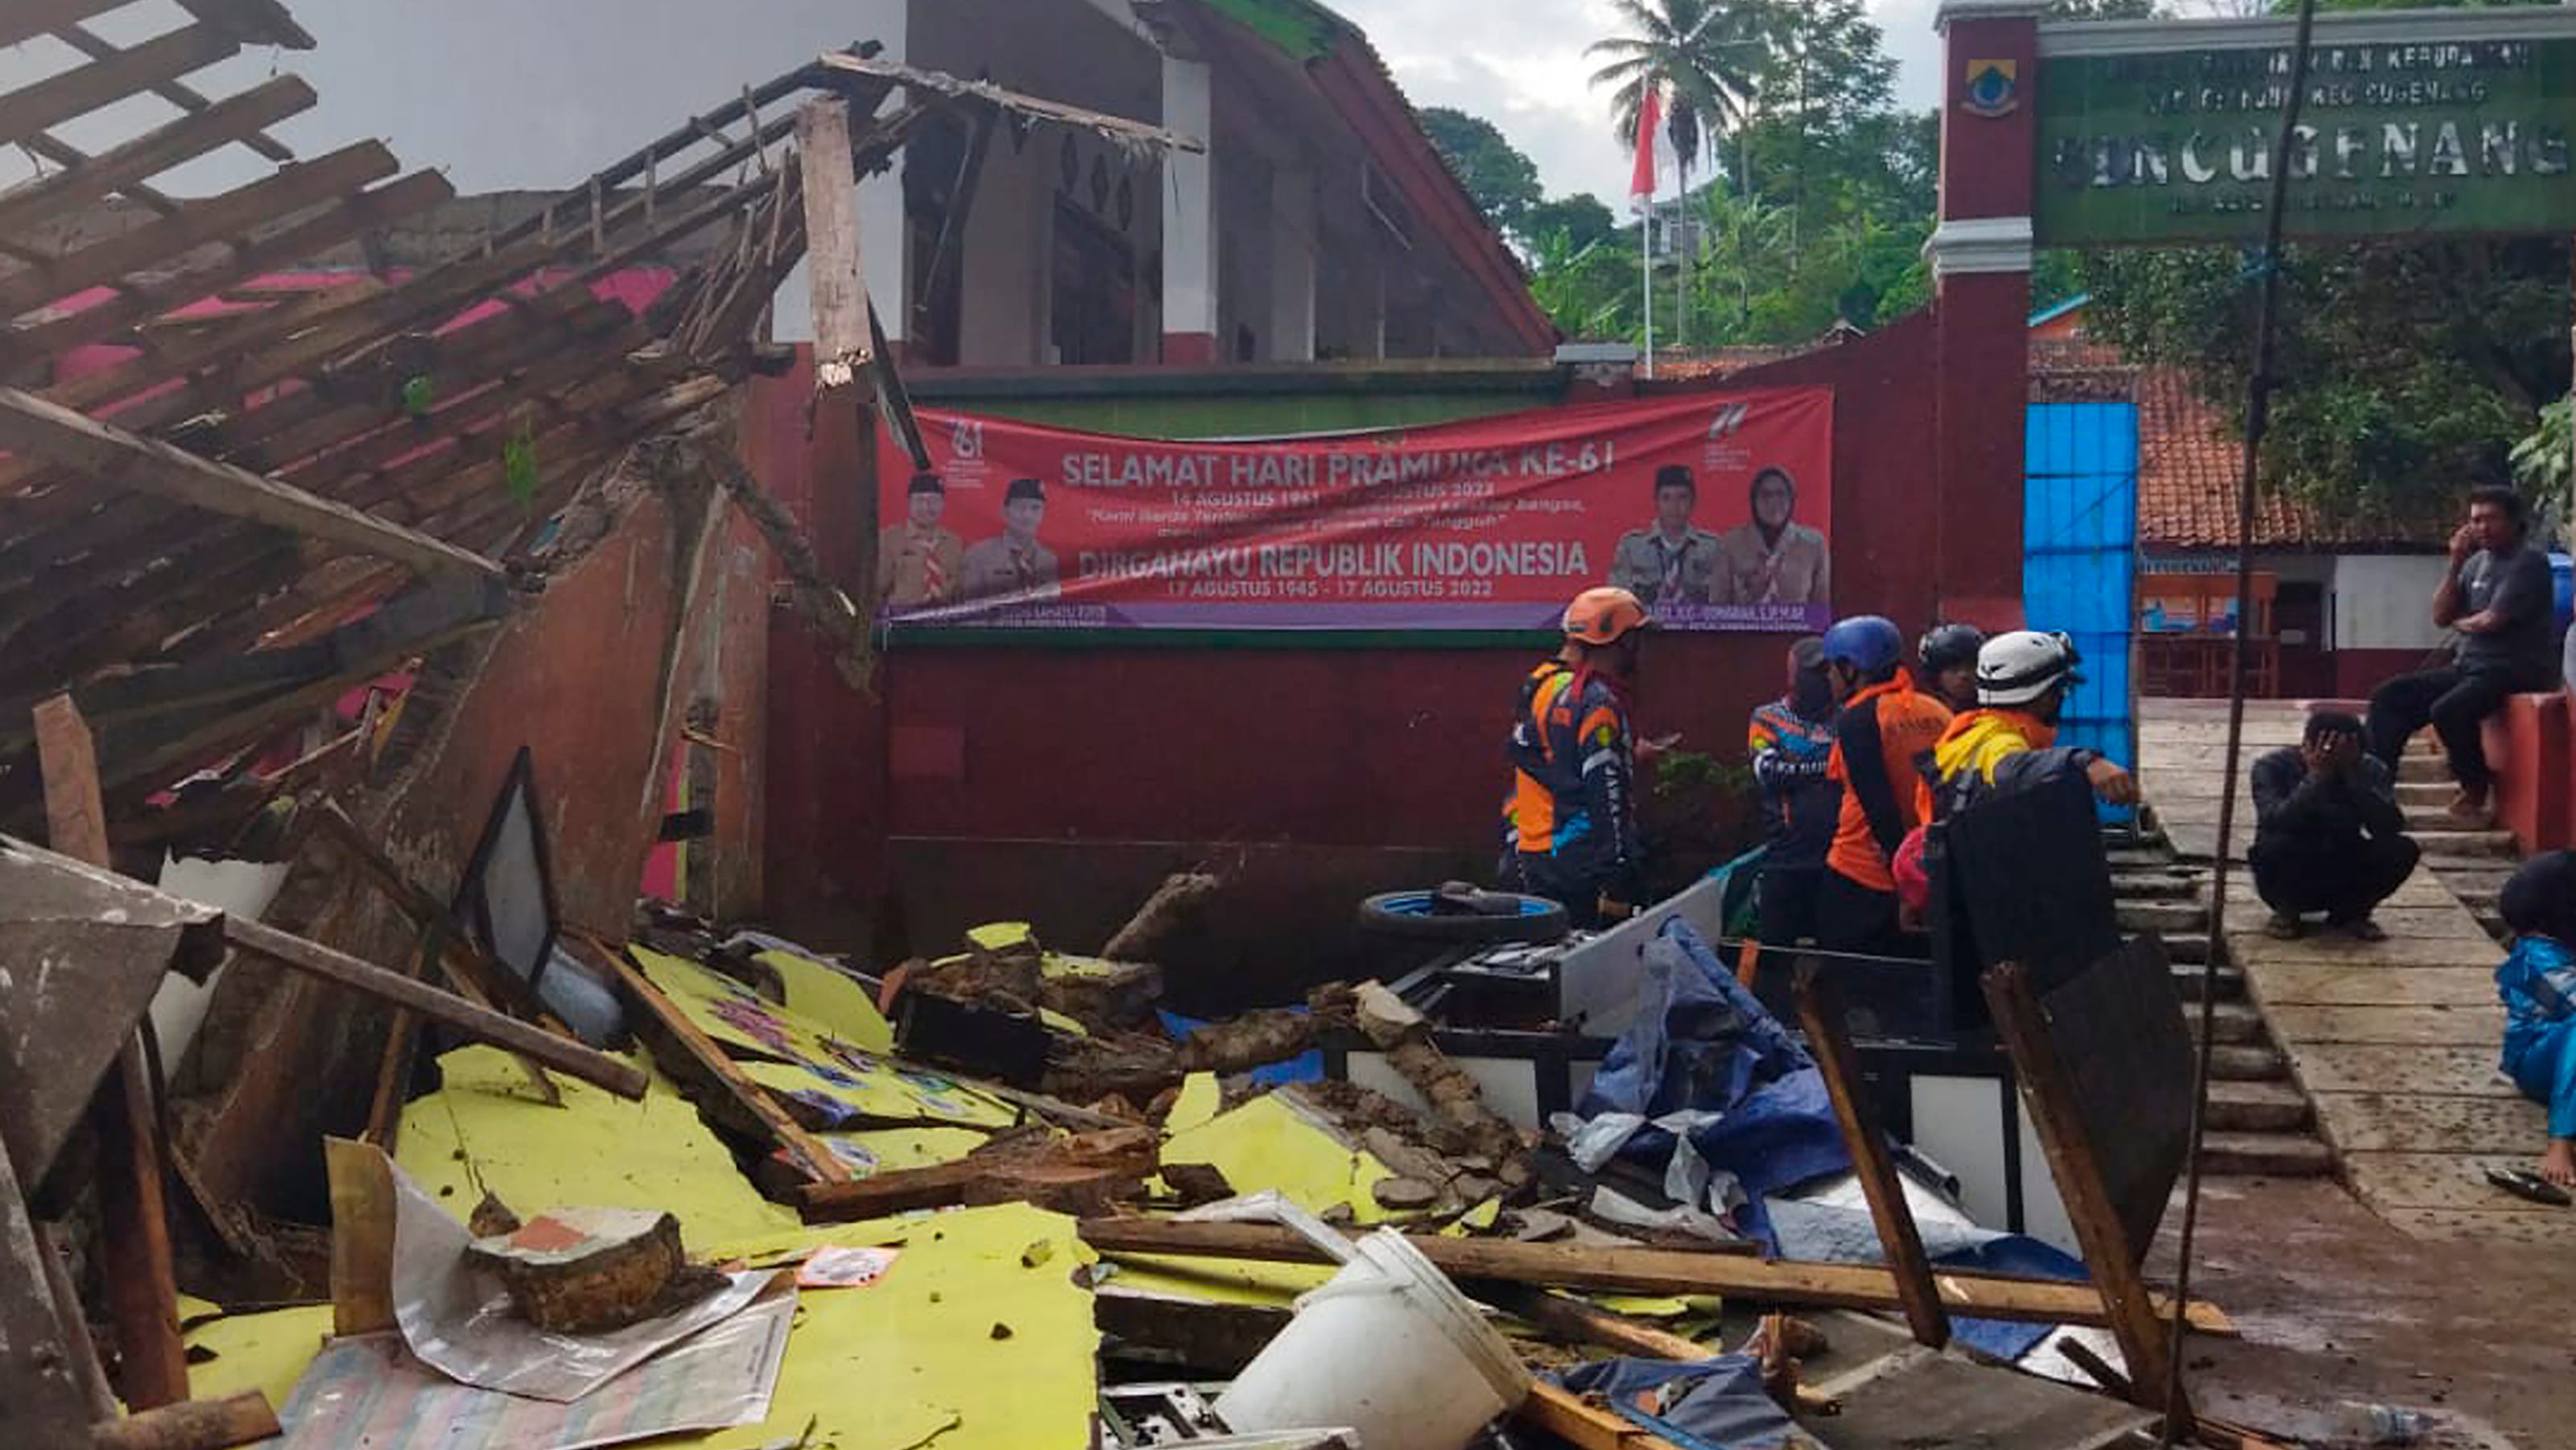 At least 56 dead, hundreds injured after earthquake topples buildings in Indonesia